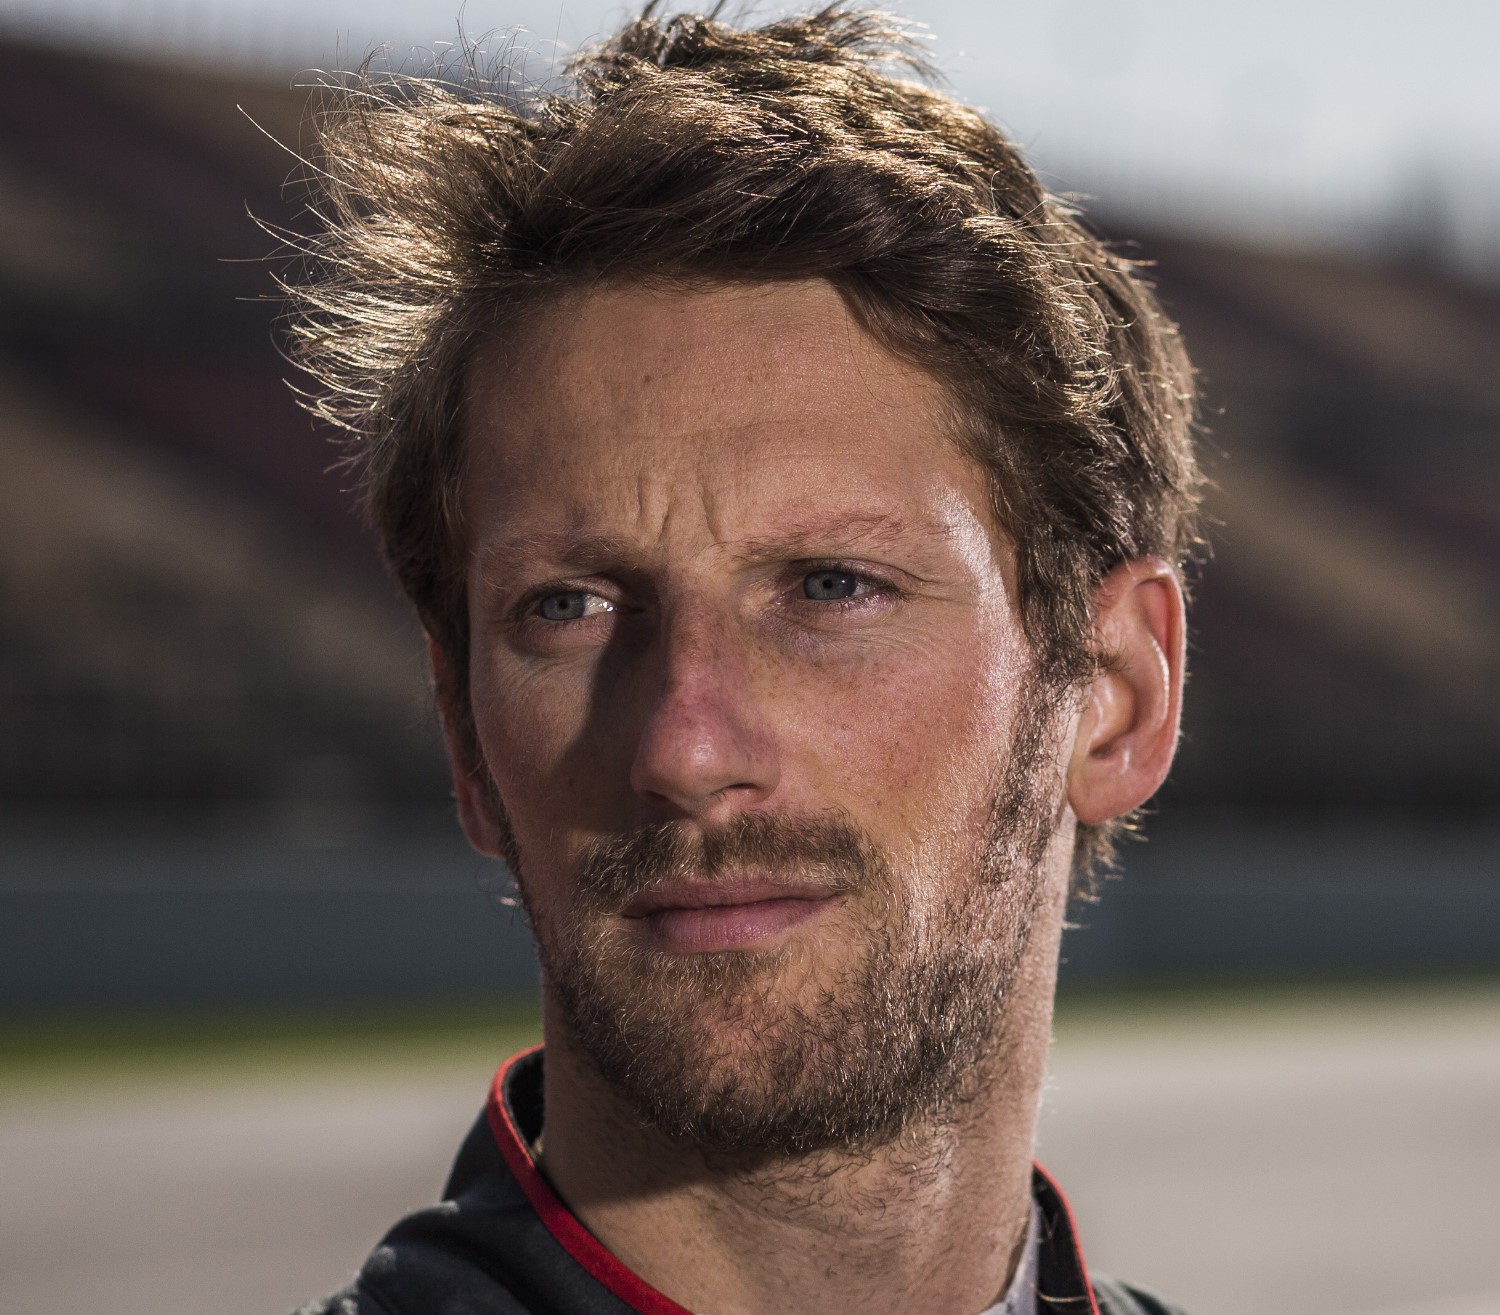 When Grosjean heard the Haas team was considering driver changes he all of a sudden went faster